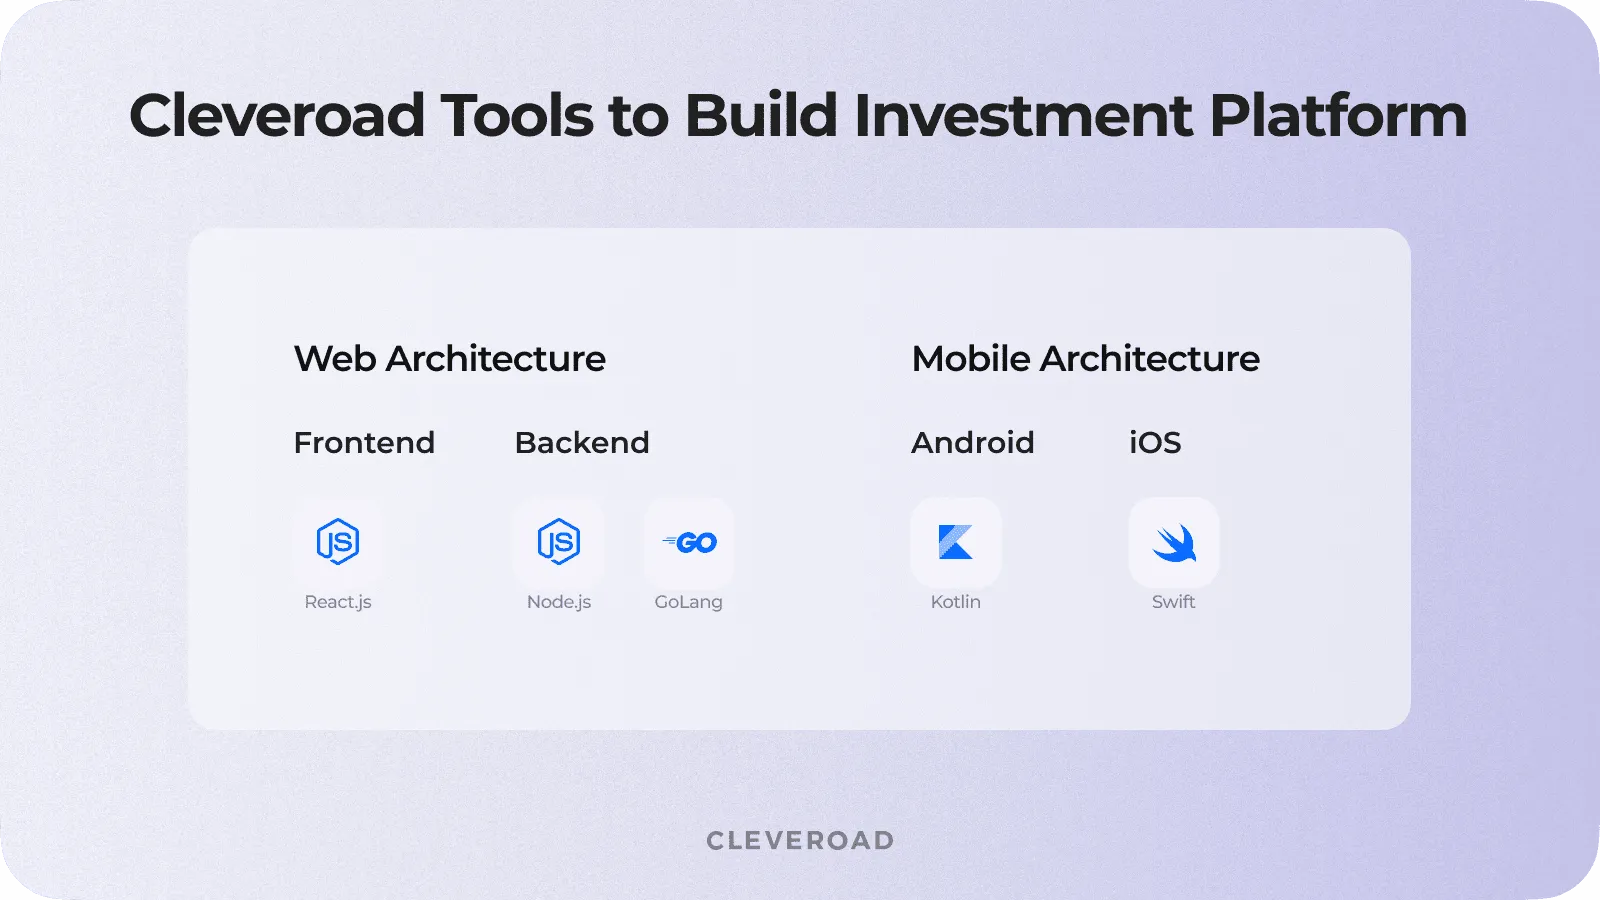 A part of Cleveroad tech stack to build web/mobile architecture for investment platform